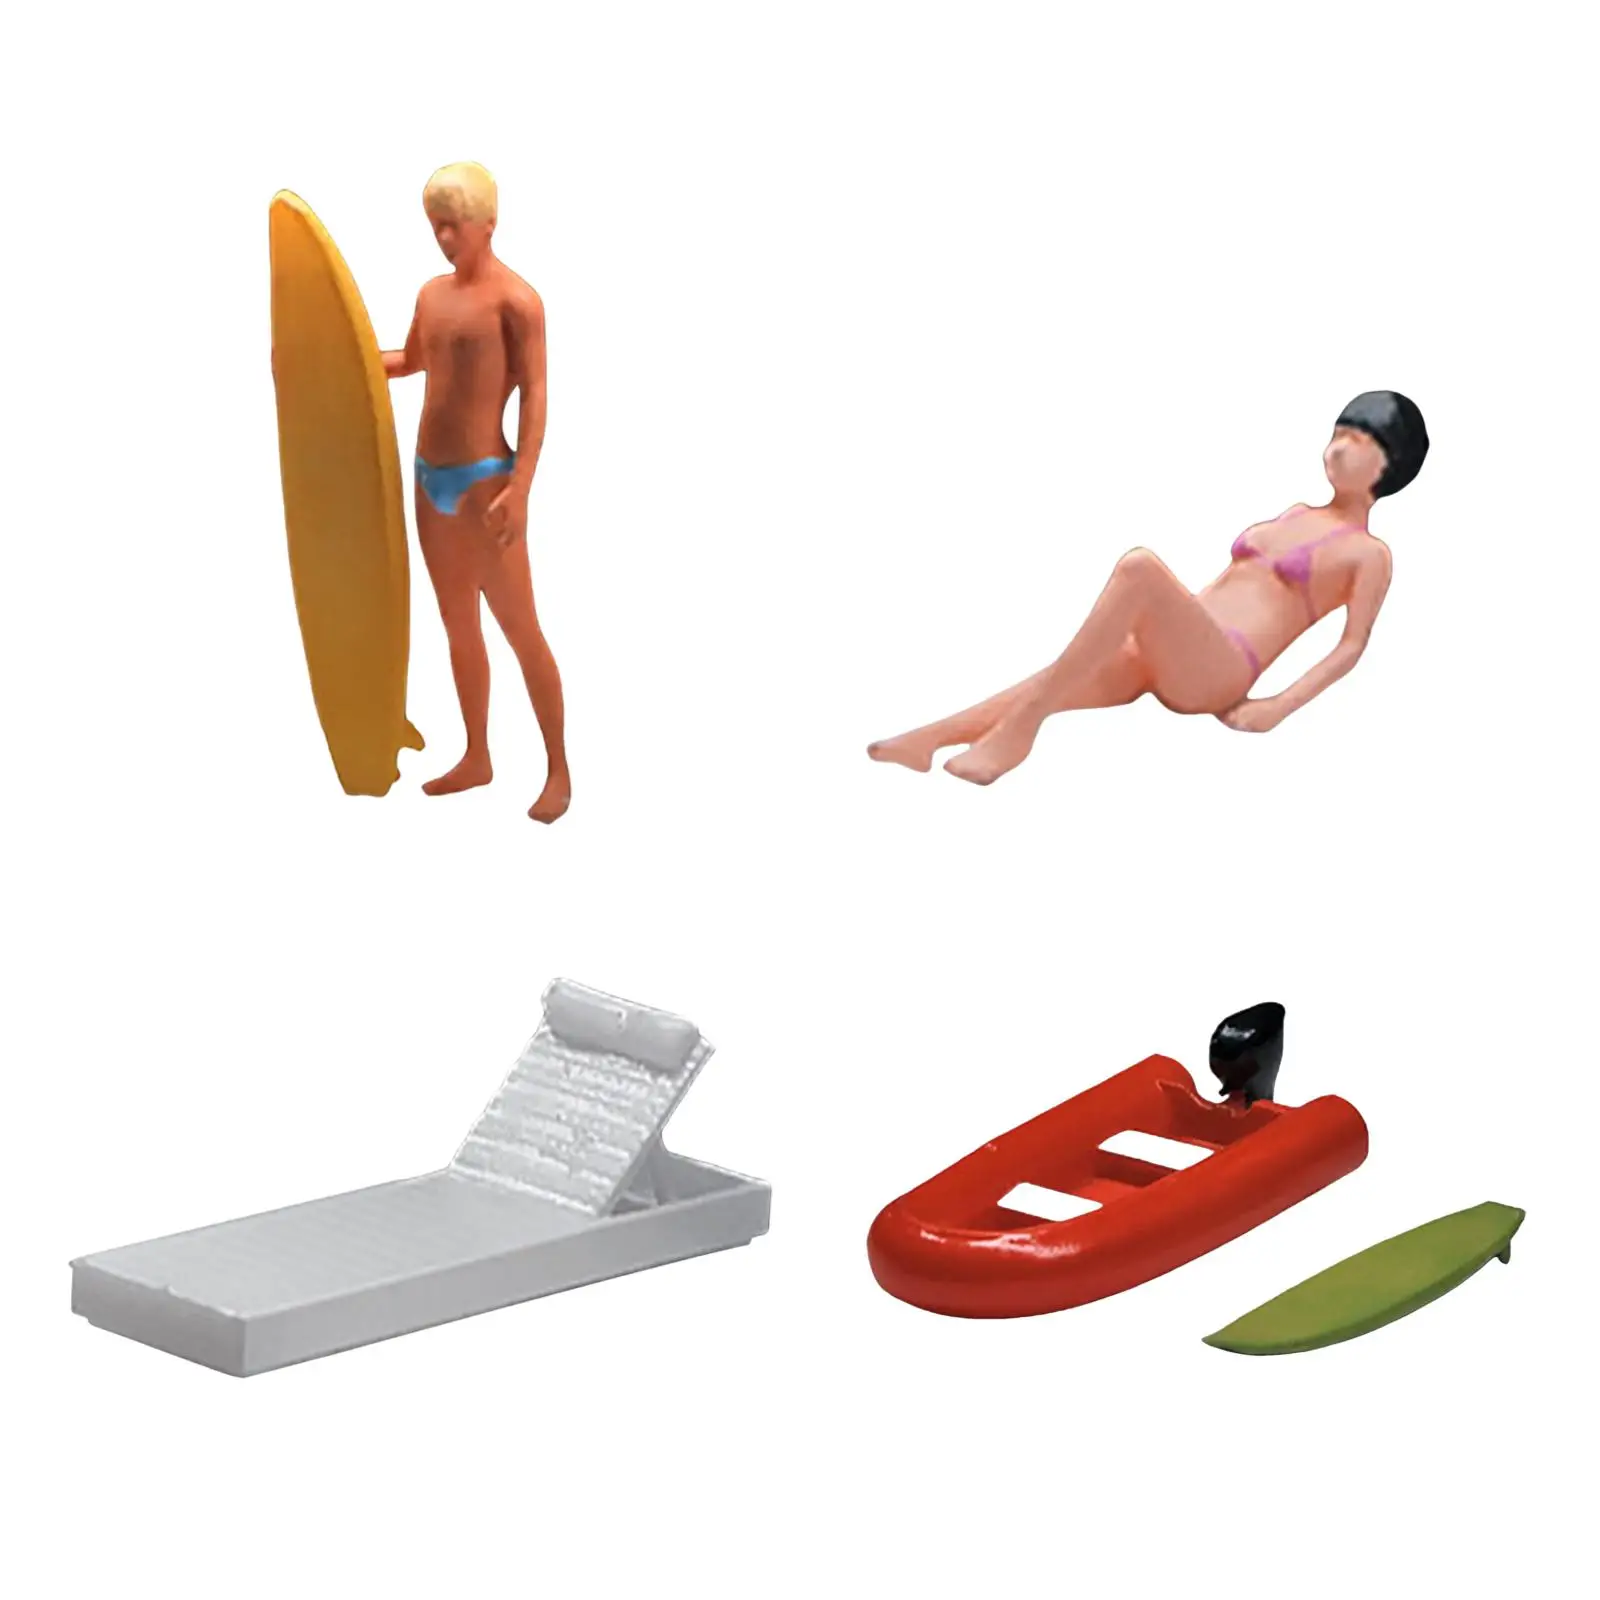 1/64 Scale Beach Model Figures, Mini People Model for DIY Projects Decoration